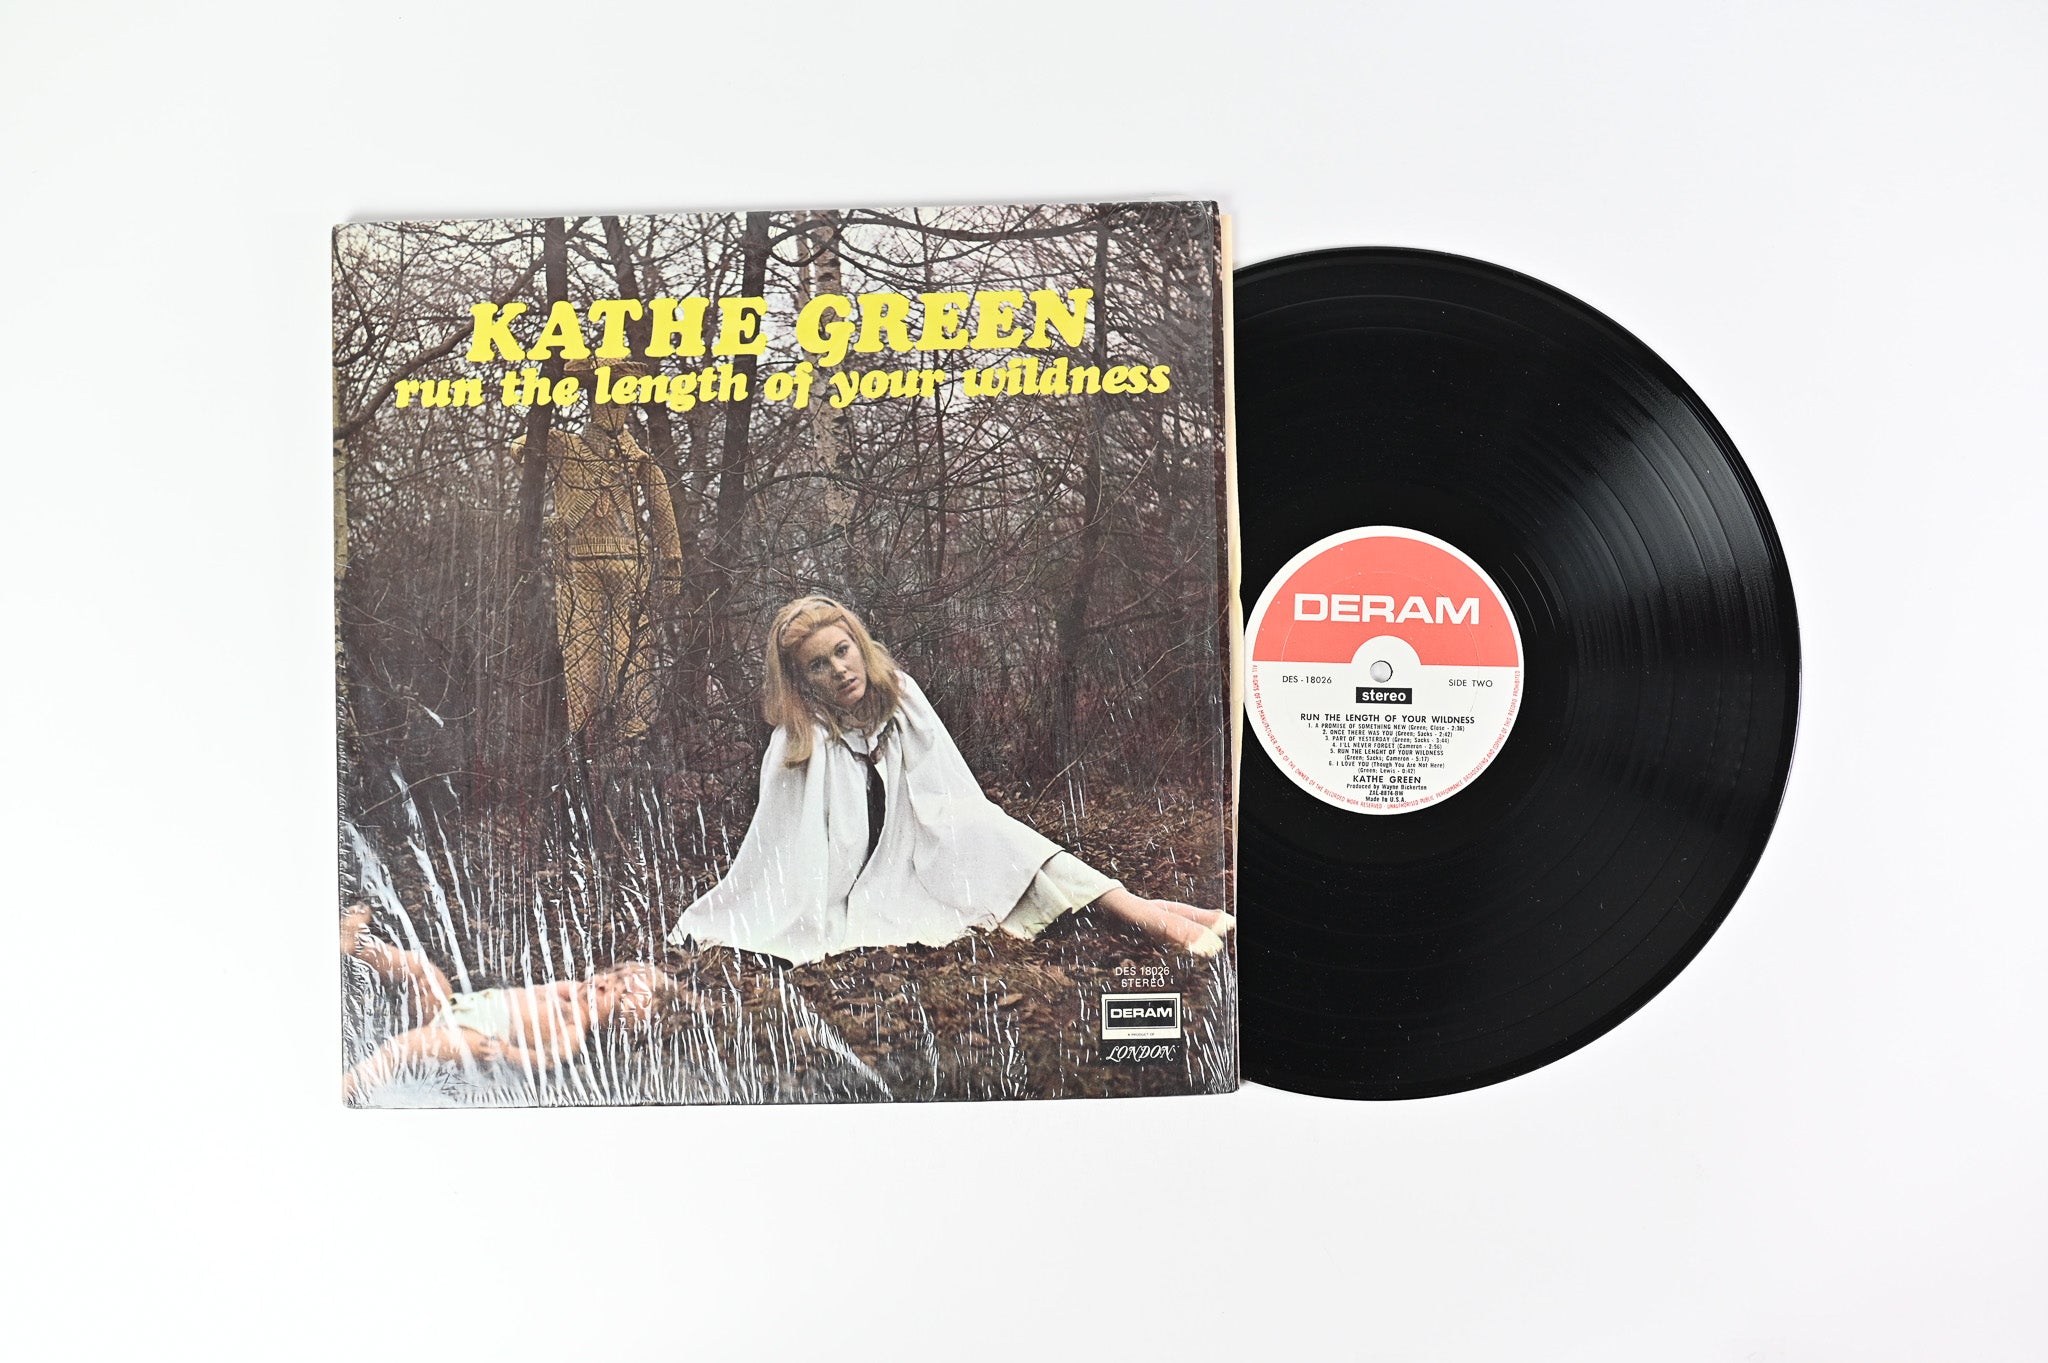 Kathe Green - Run The Length Of Your Wildness on Deram